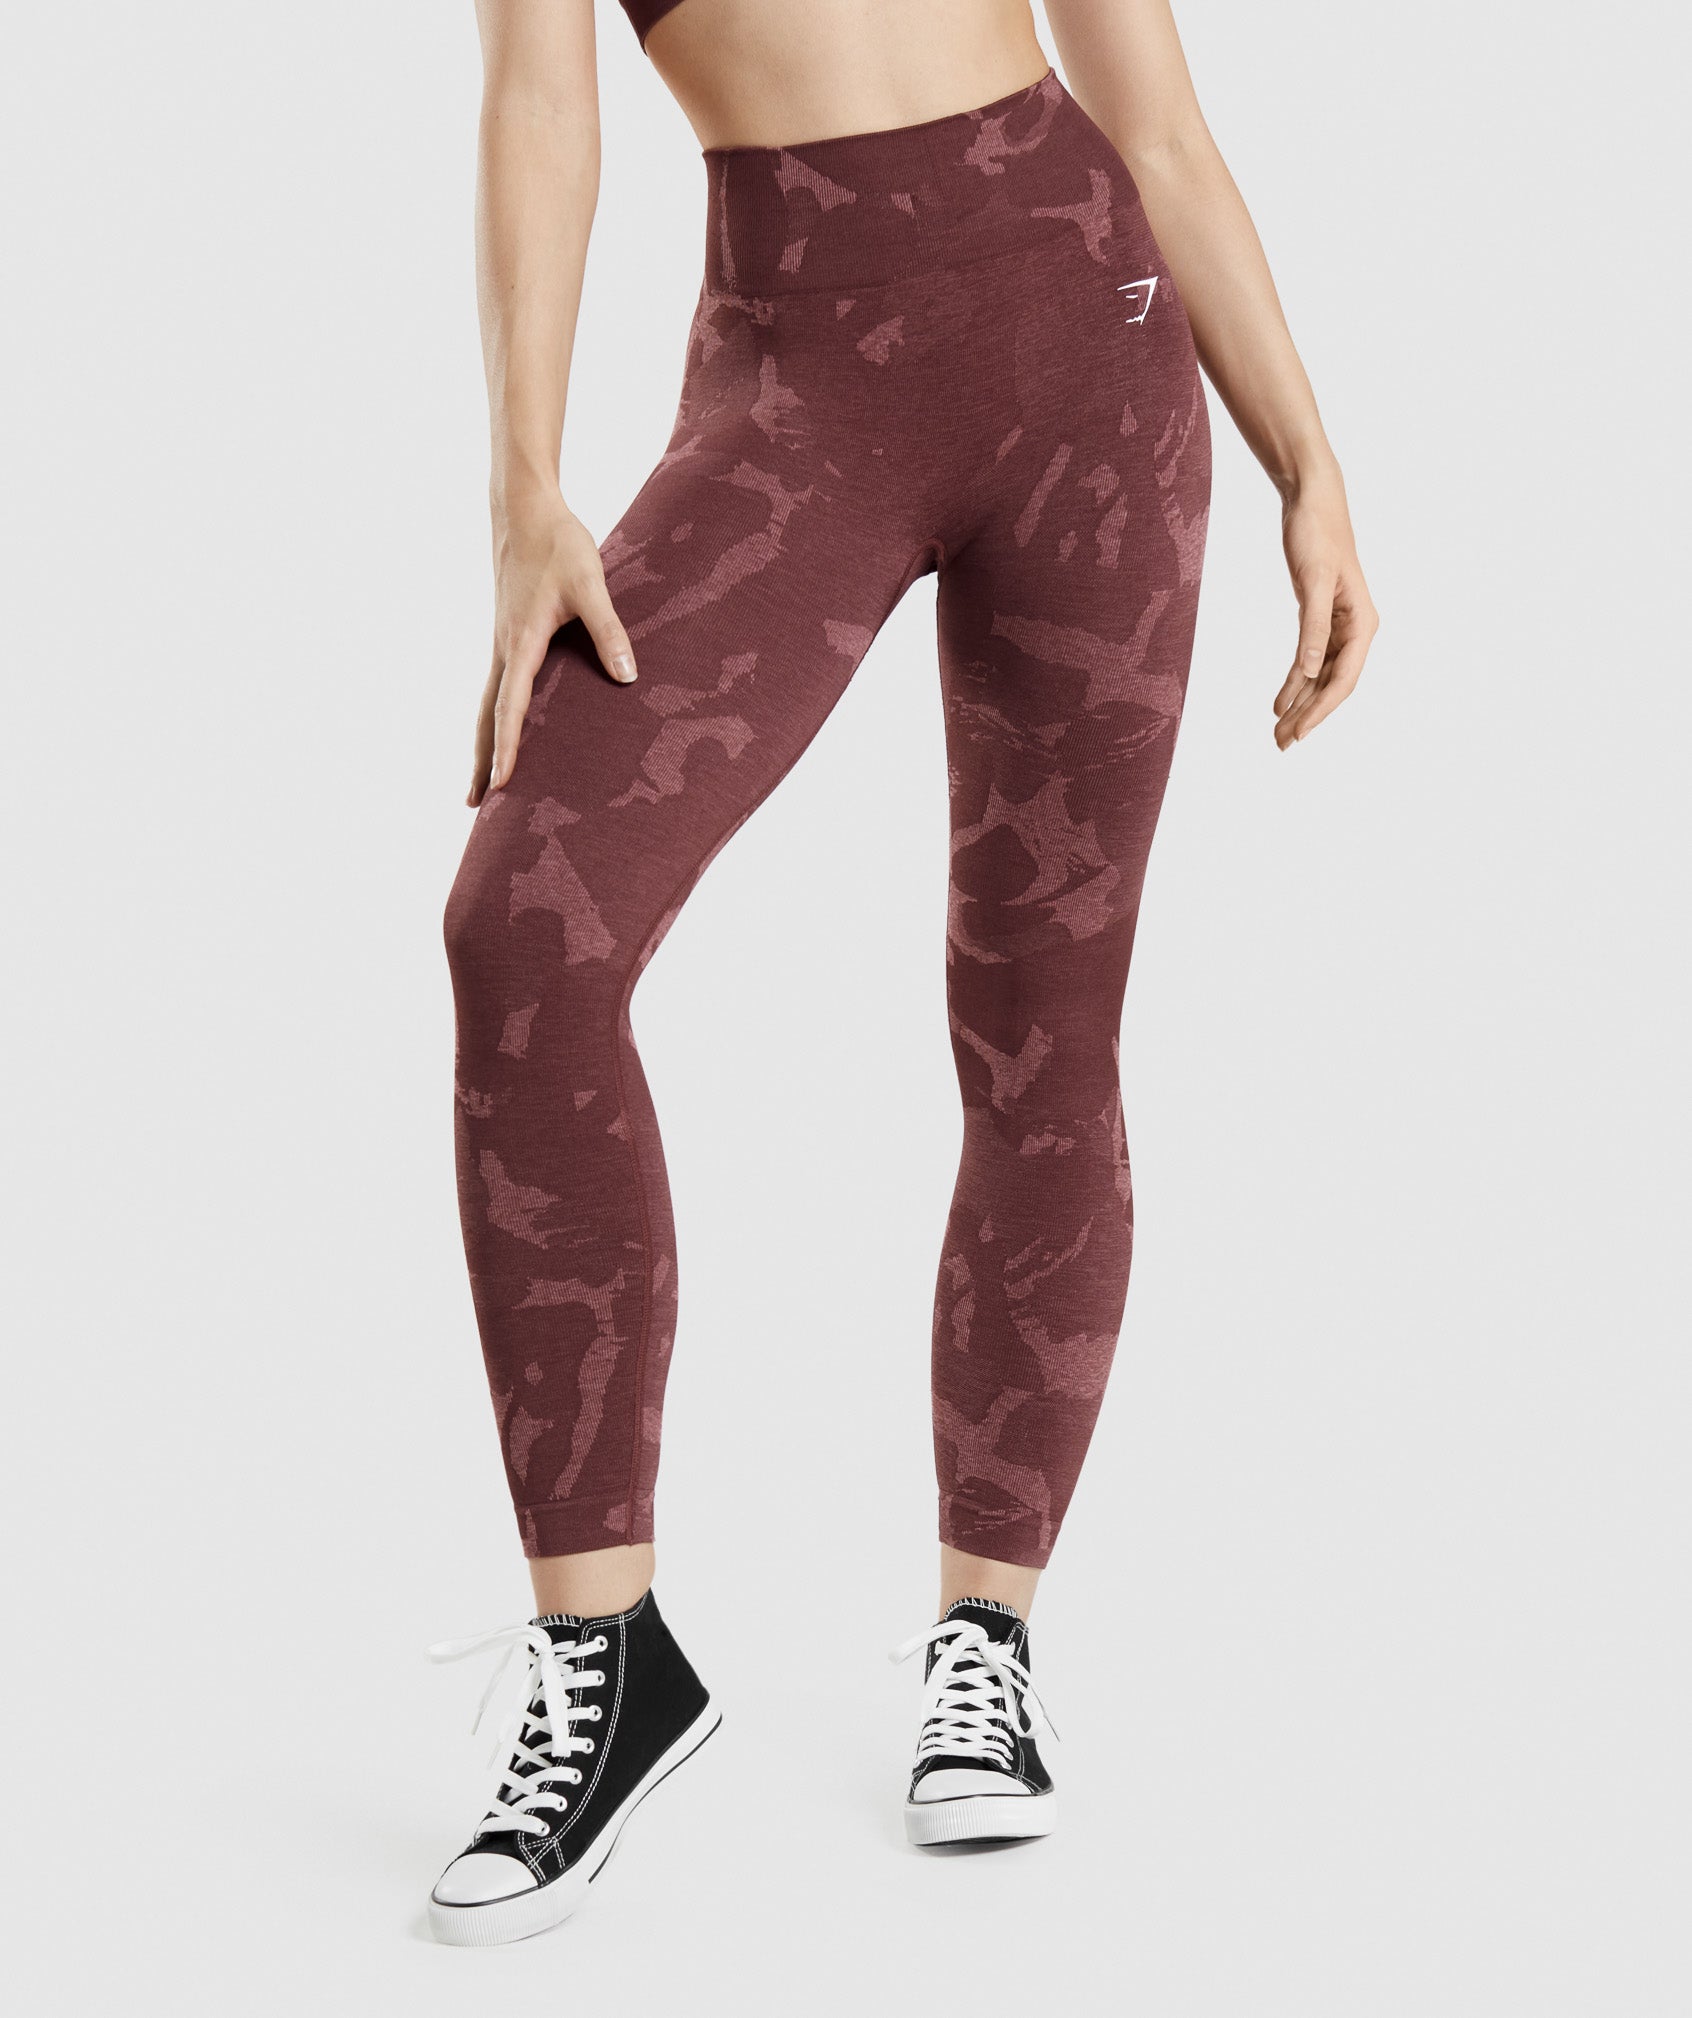 Gymshark Brown Athletic Sweat Pants for Women